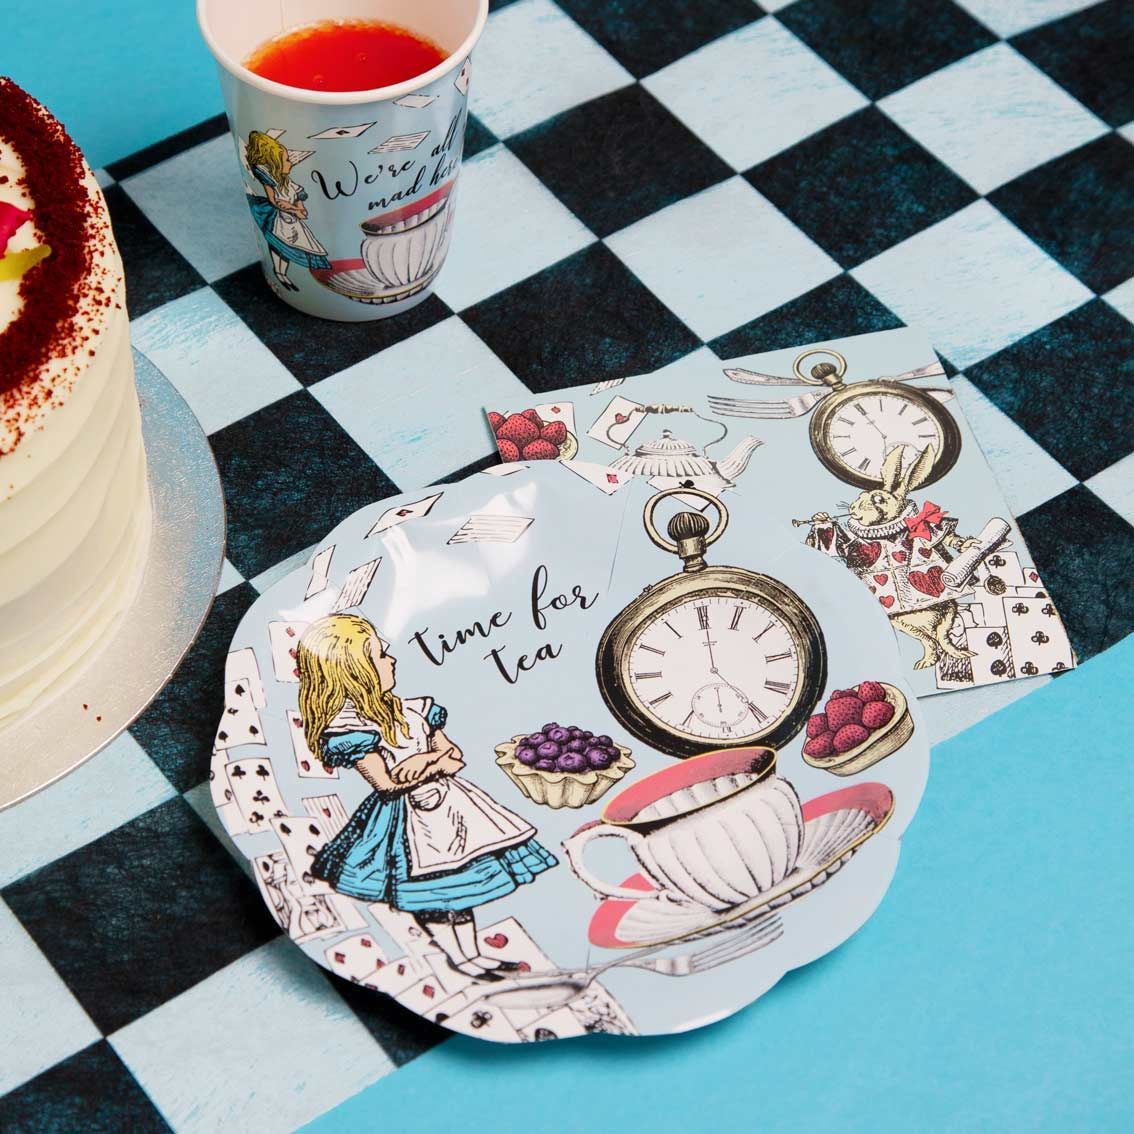 Truly Alice Blue Paper Plates Party supplies